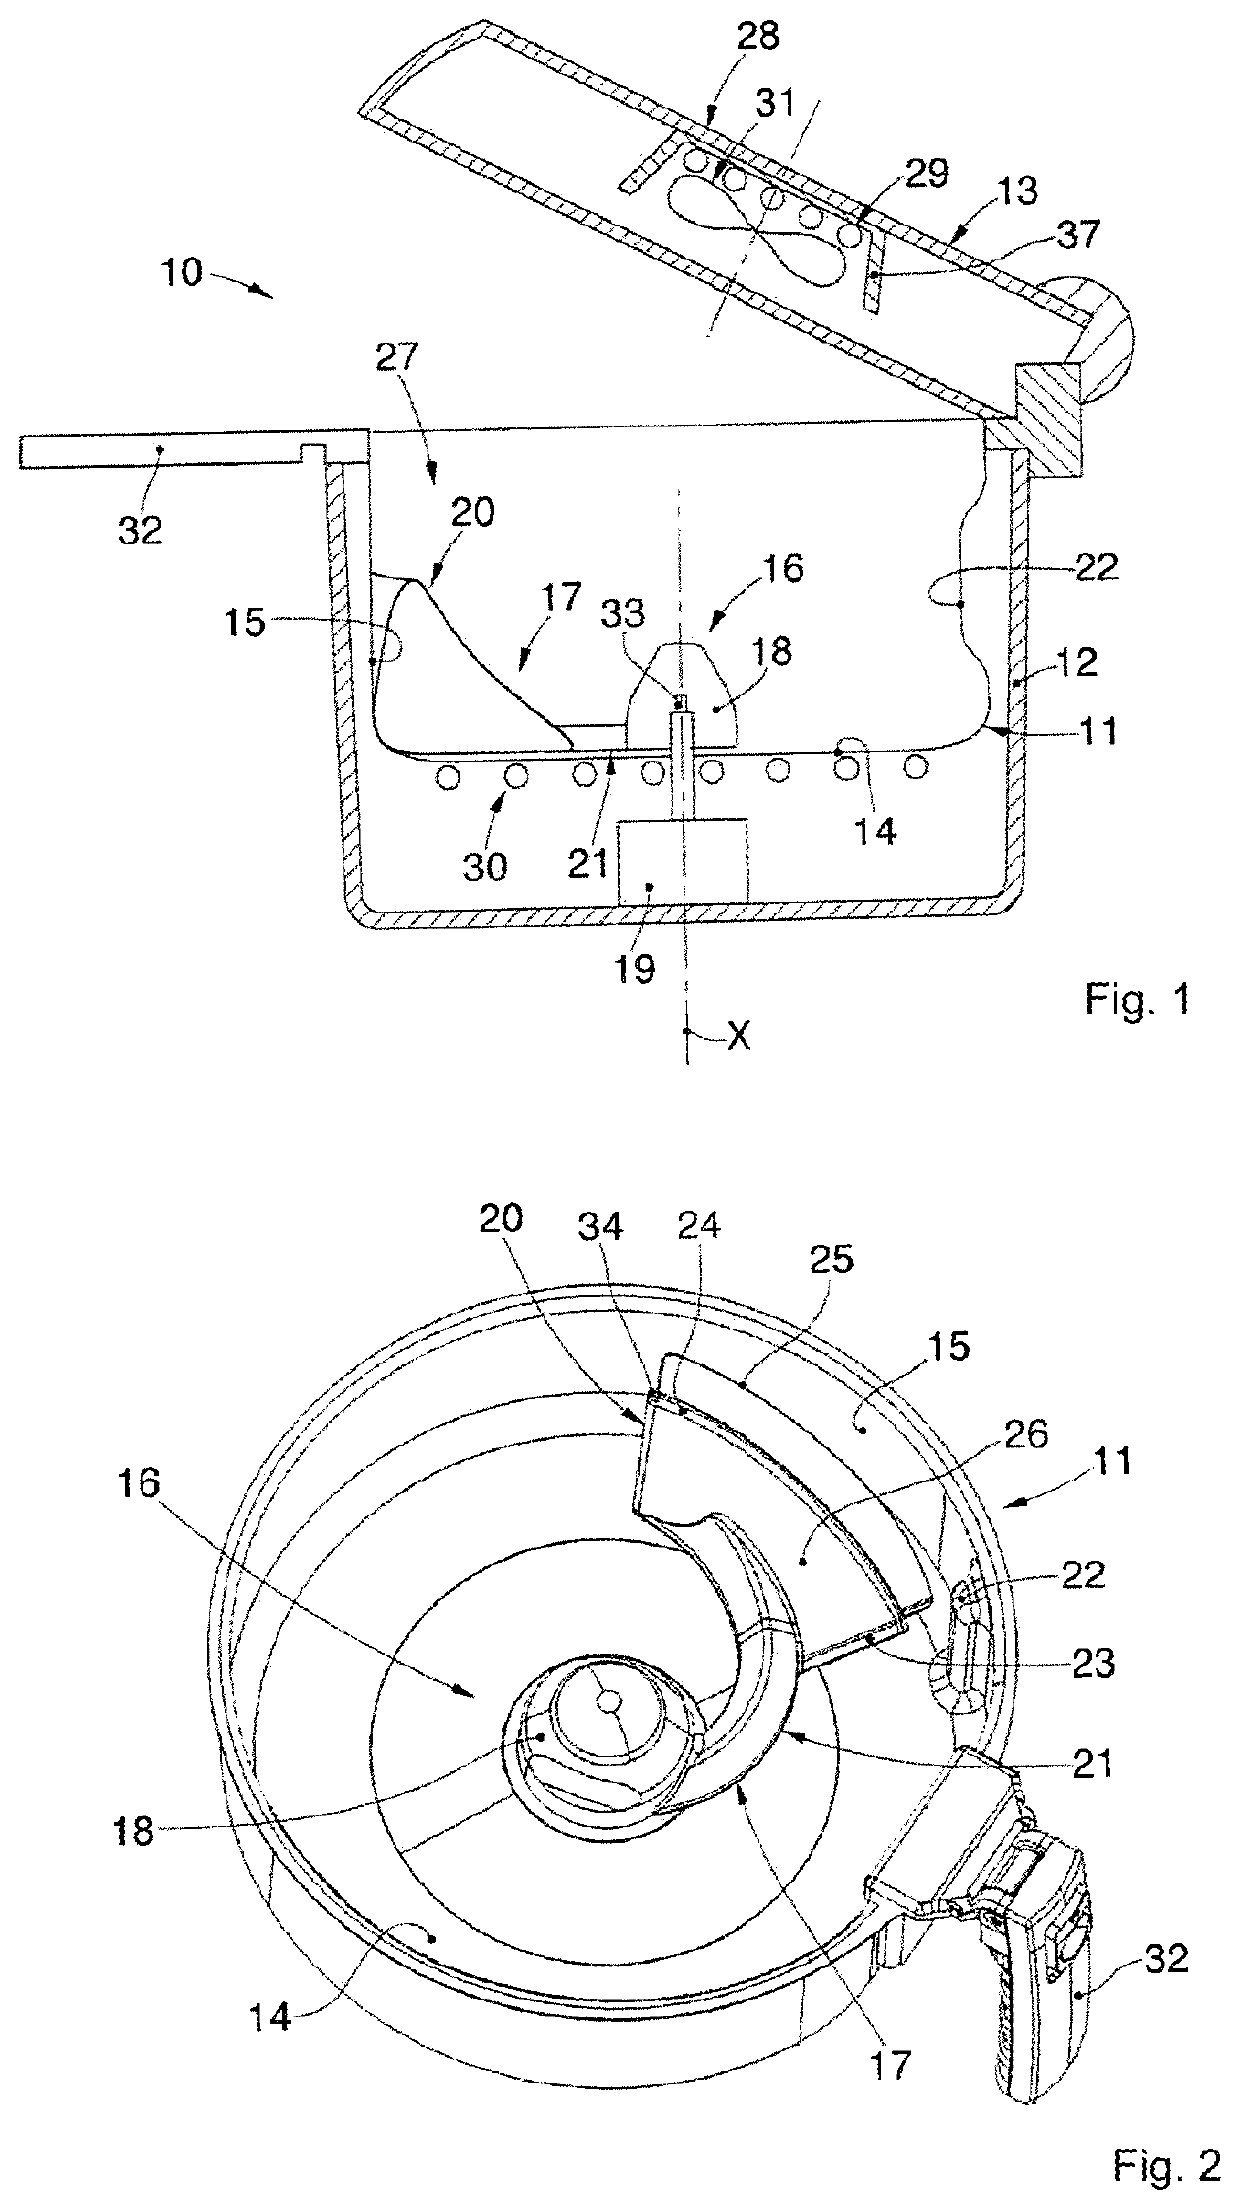 Apparatus with a mixing device for cooking food